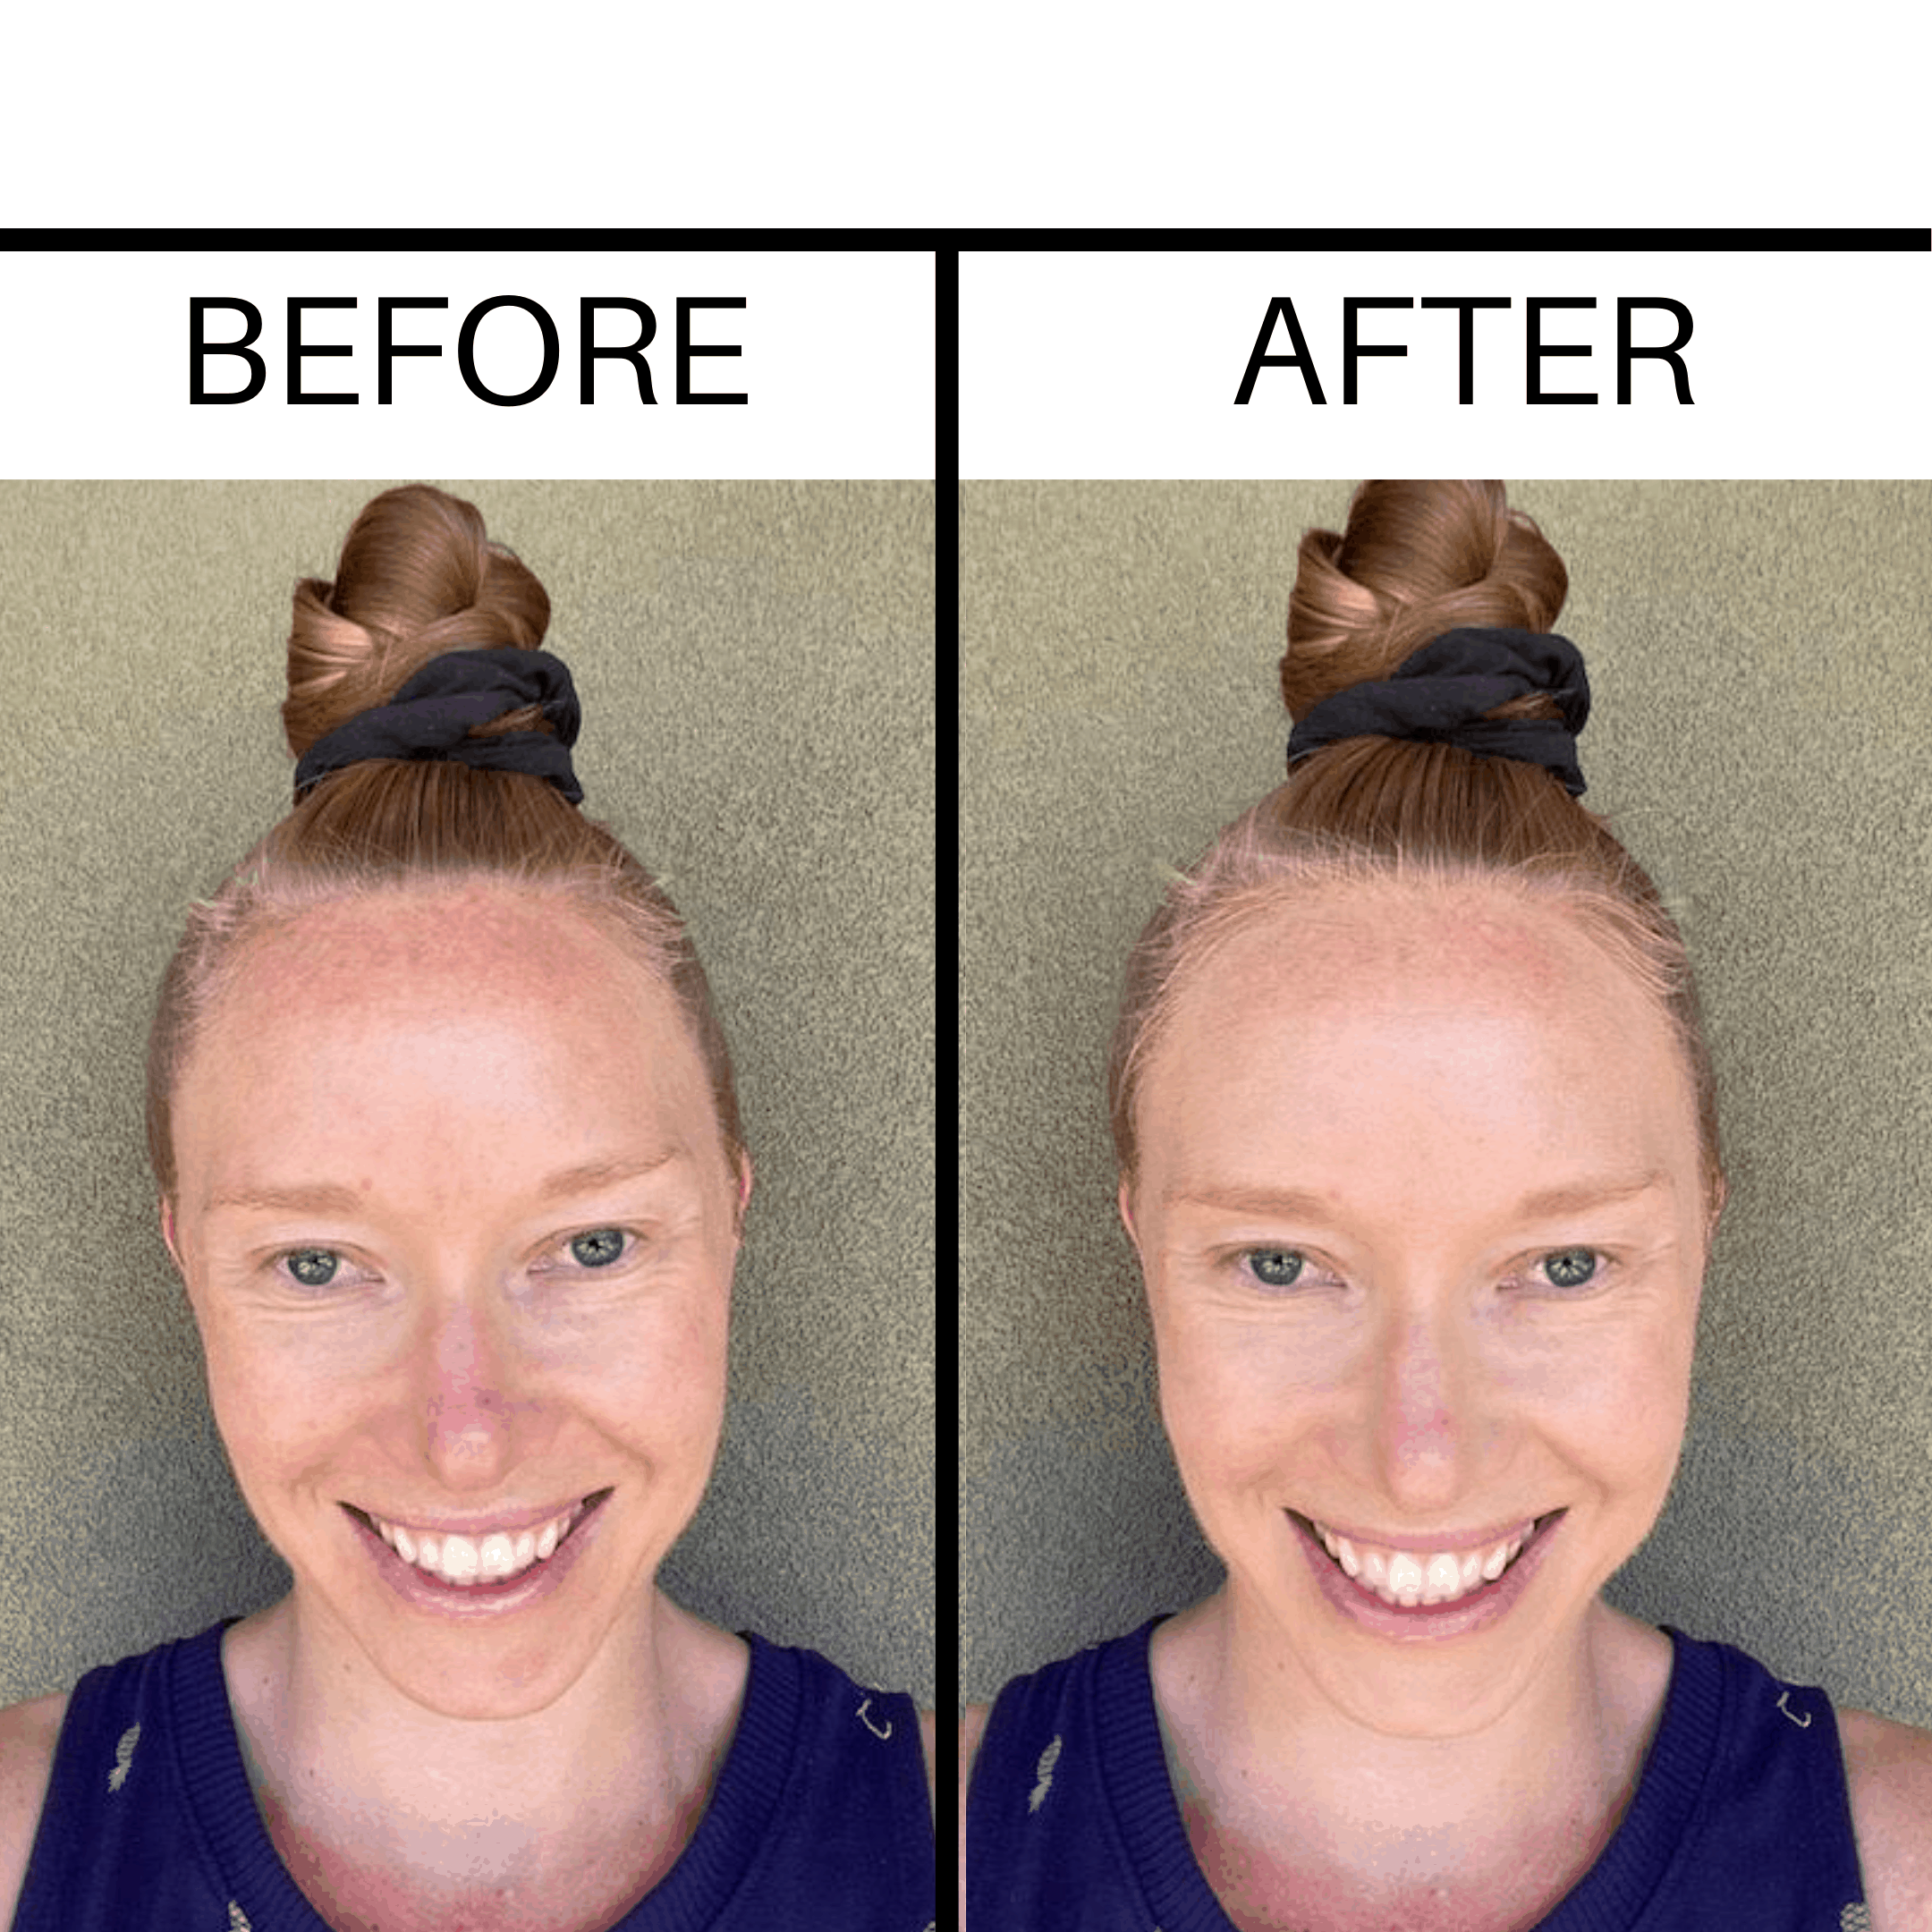 A before and after photo of Erin Carter wearing the Beautycounter foundation.